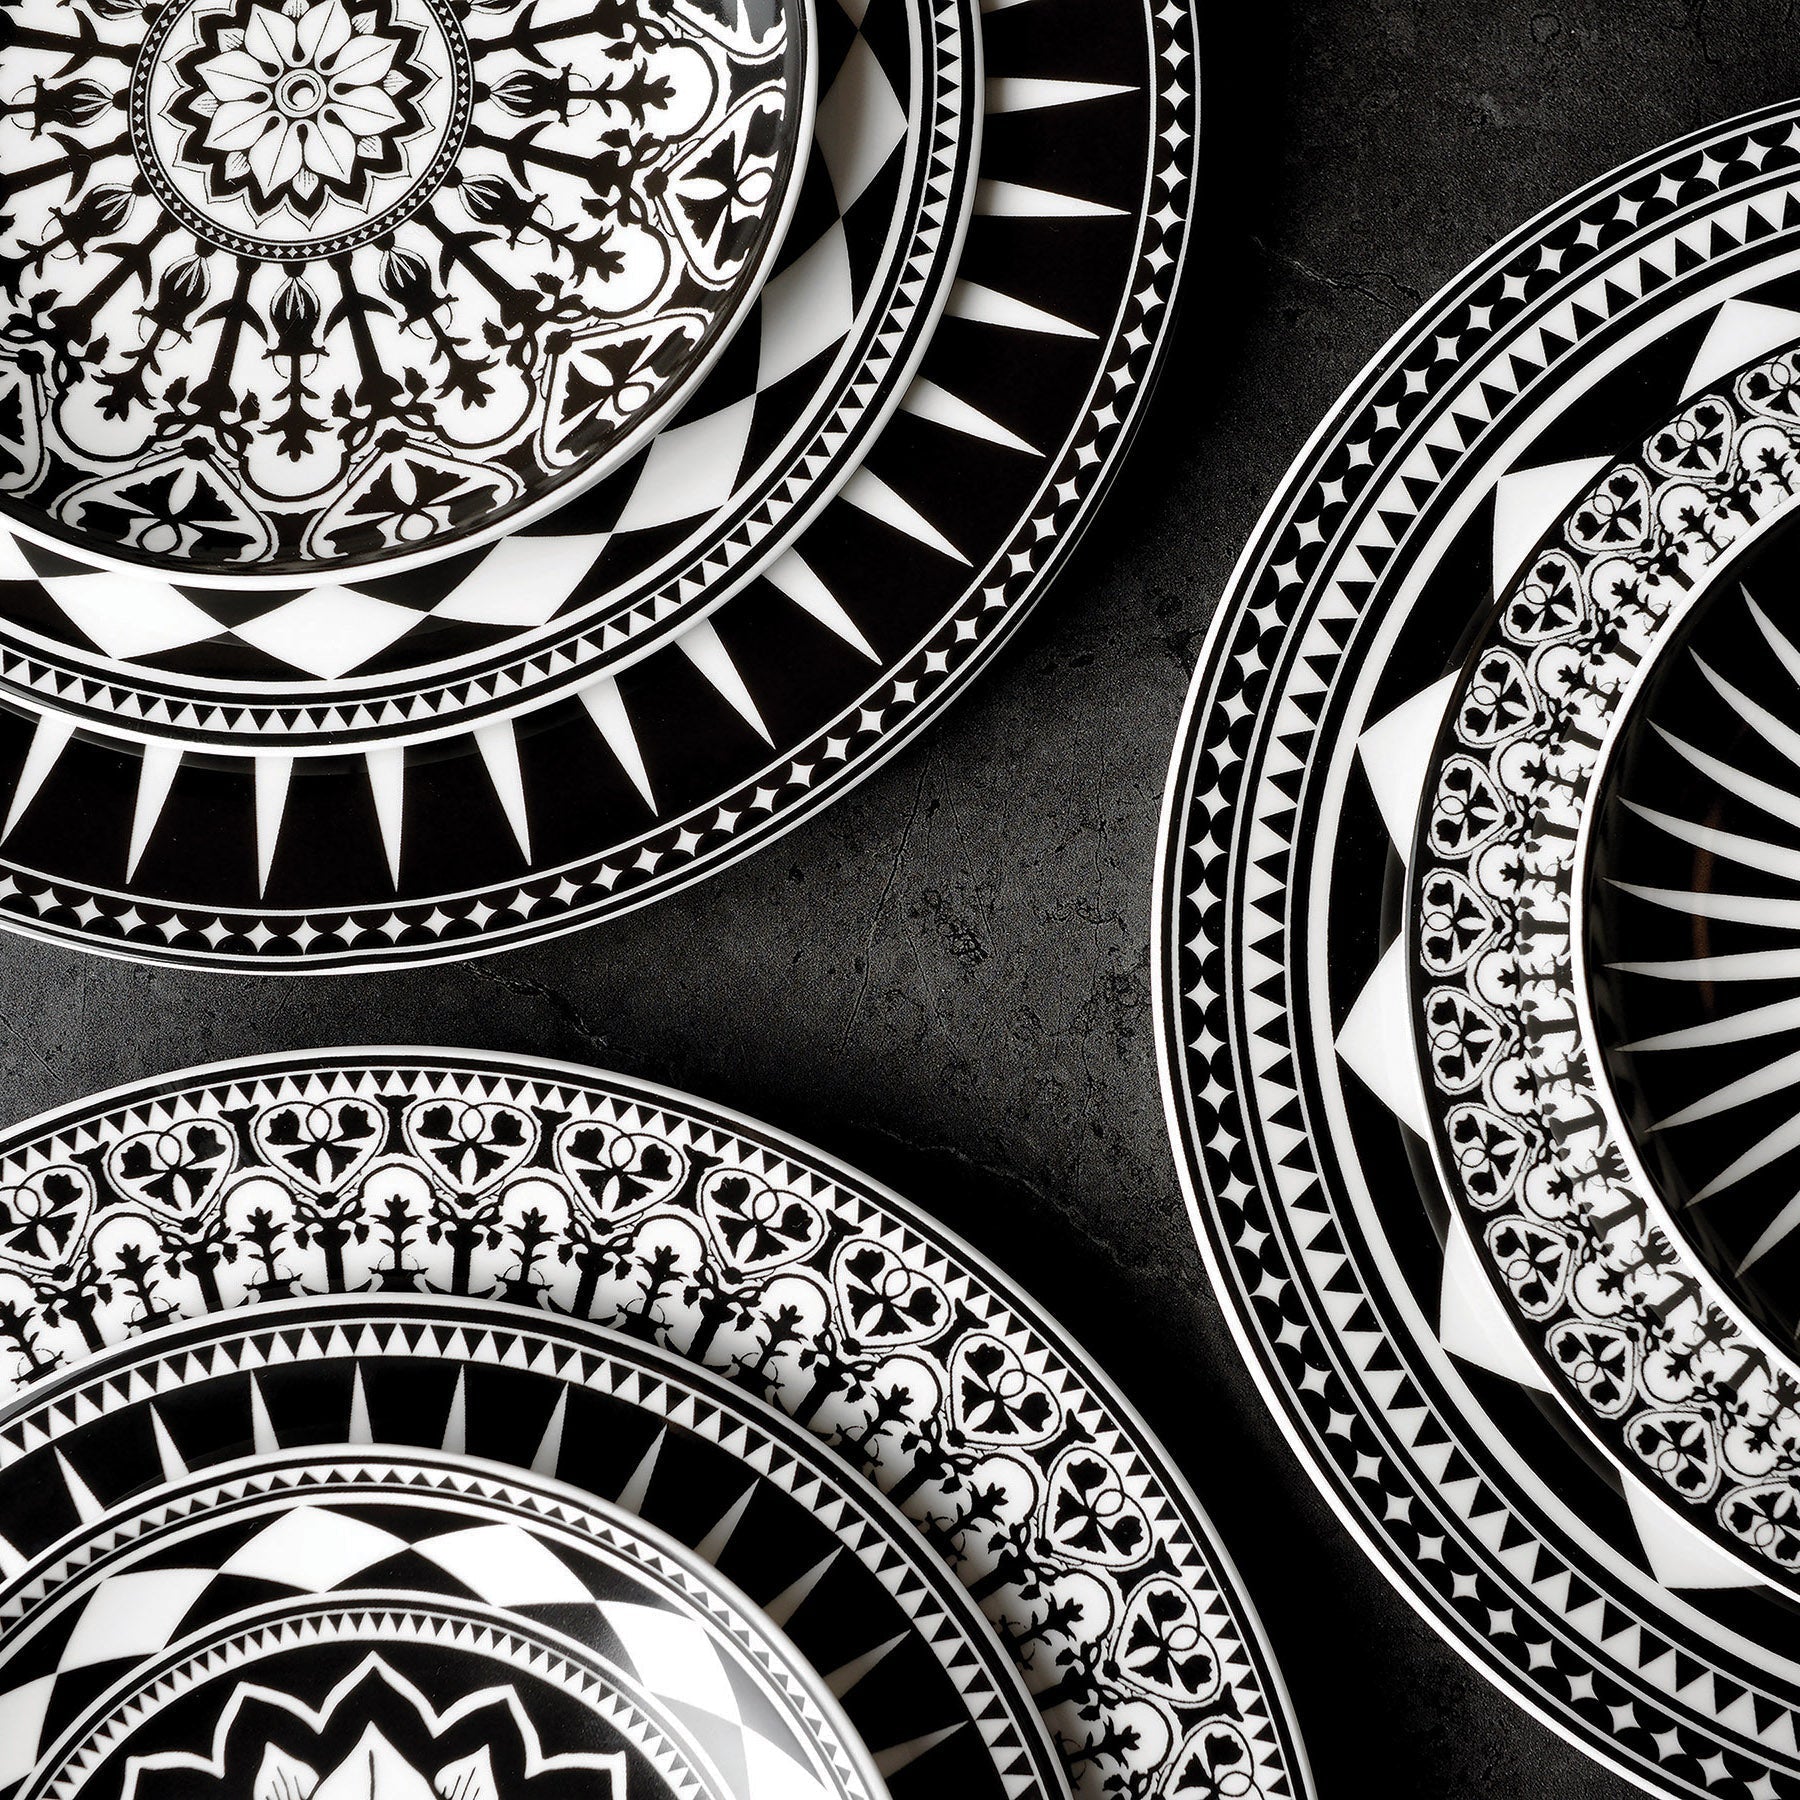 Black and white plates with designs on them.